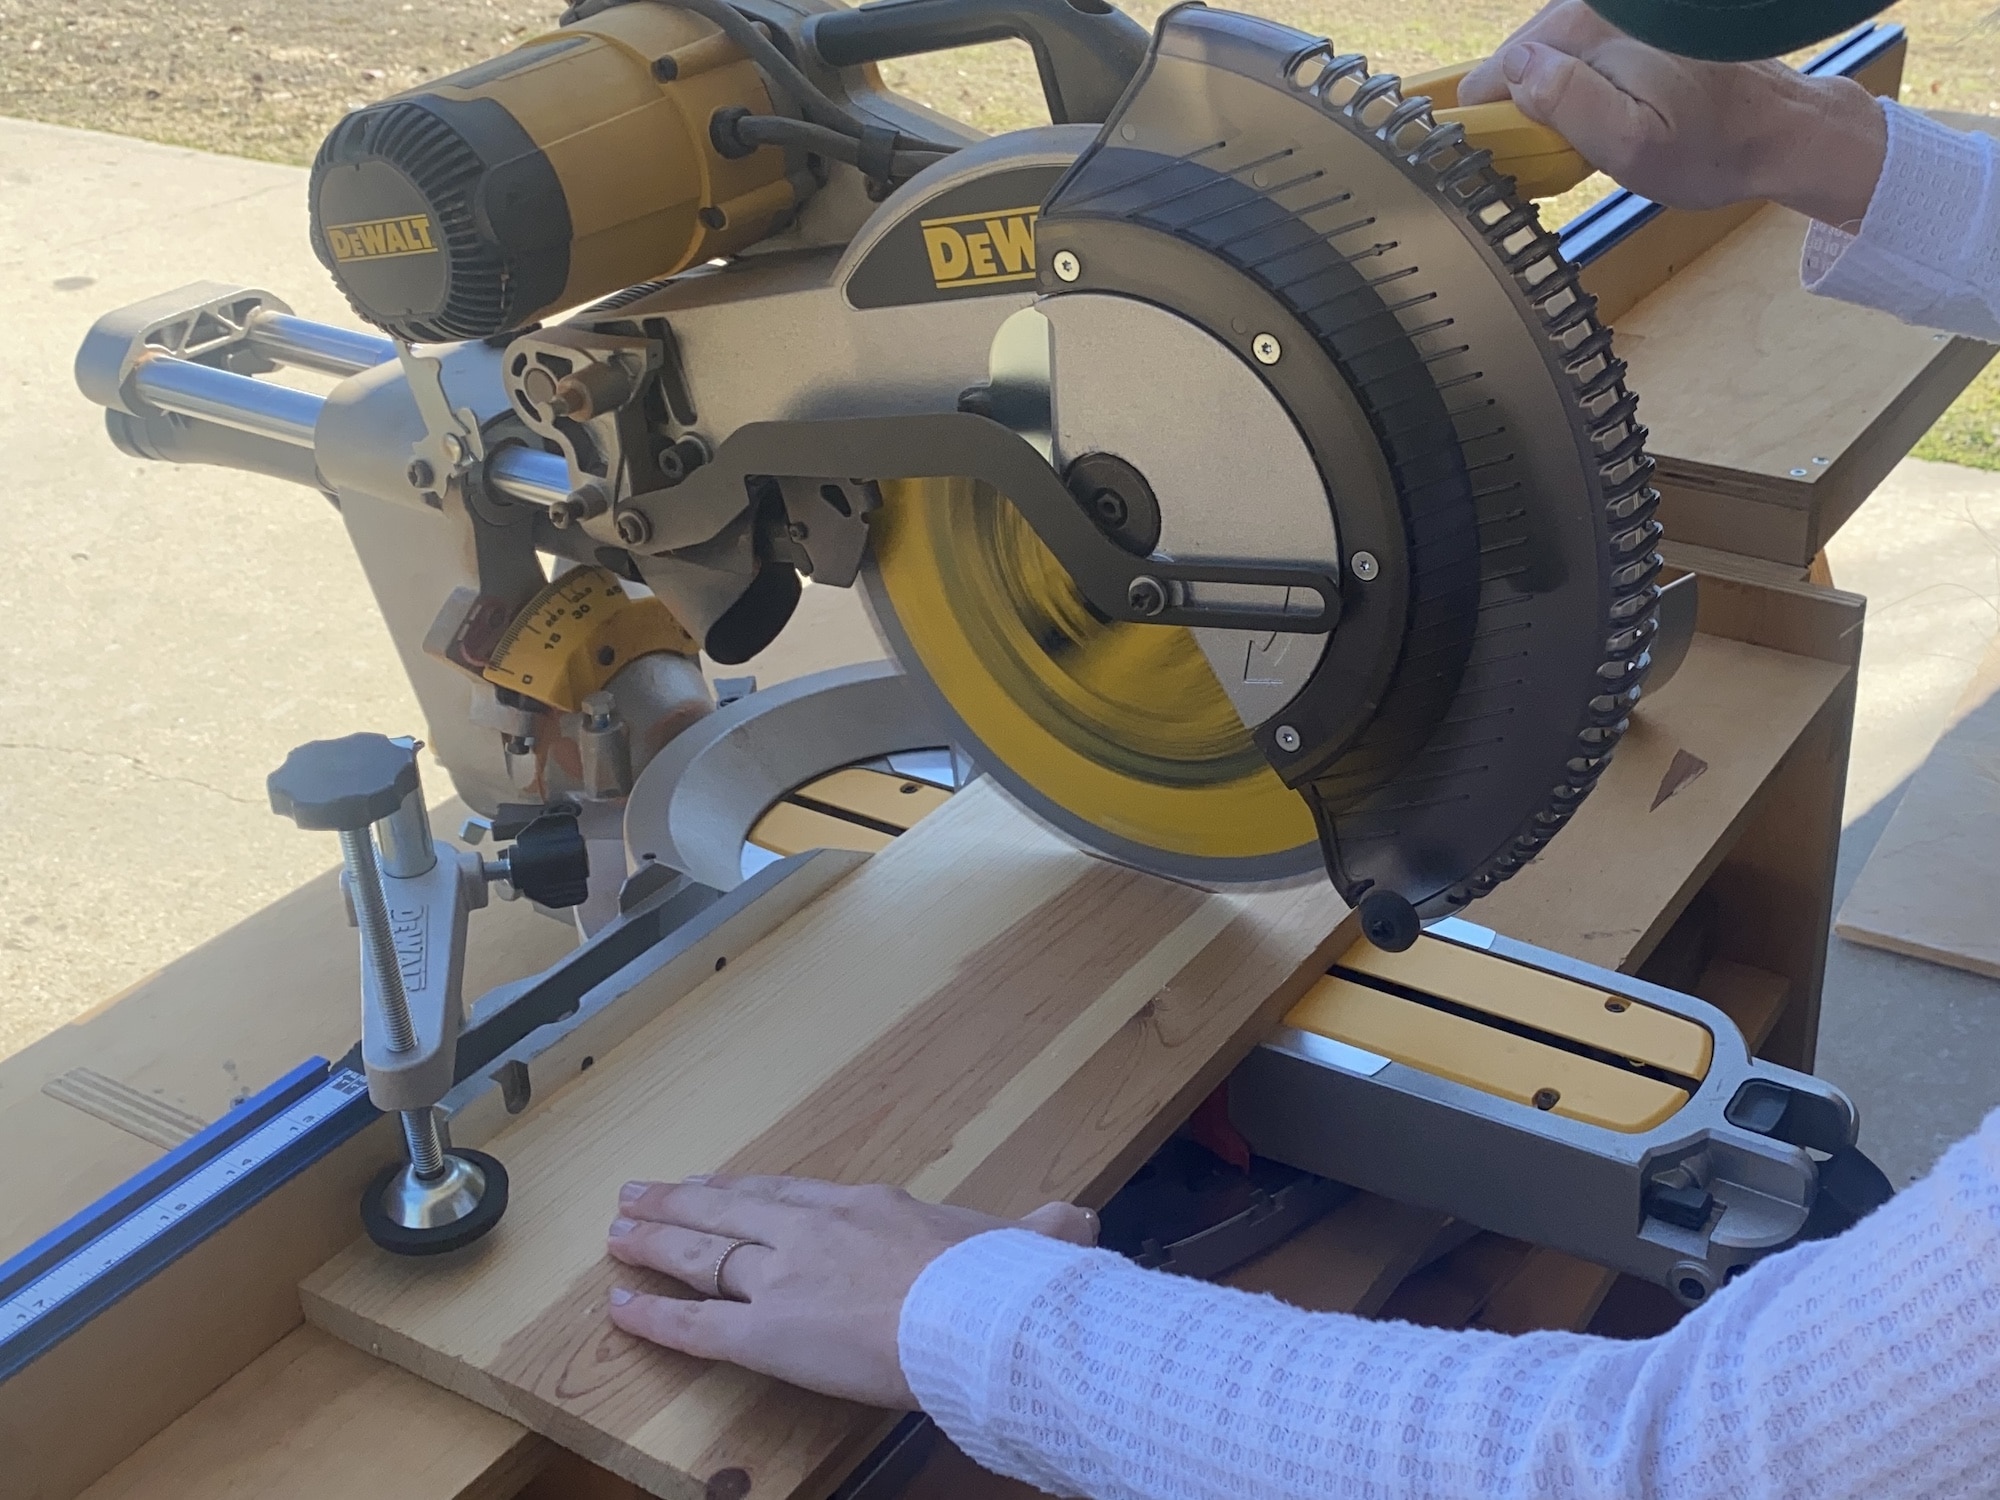 How to Use a Miter Saw Safely: A Beginner’s Guide